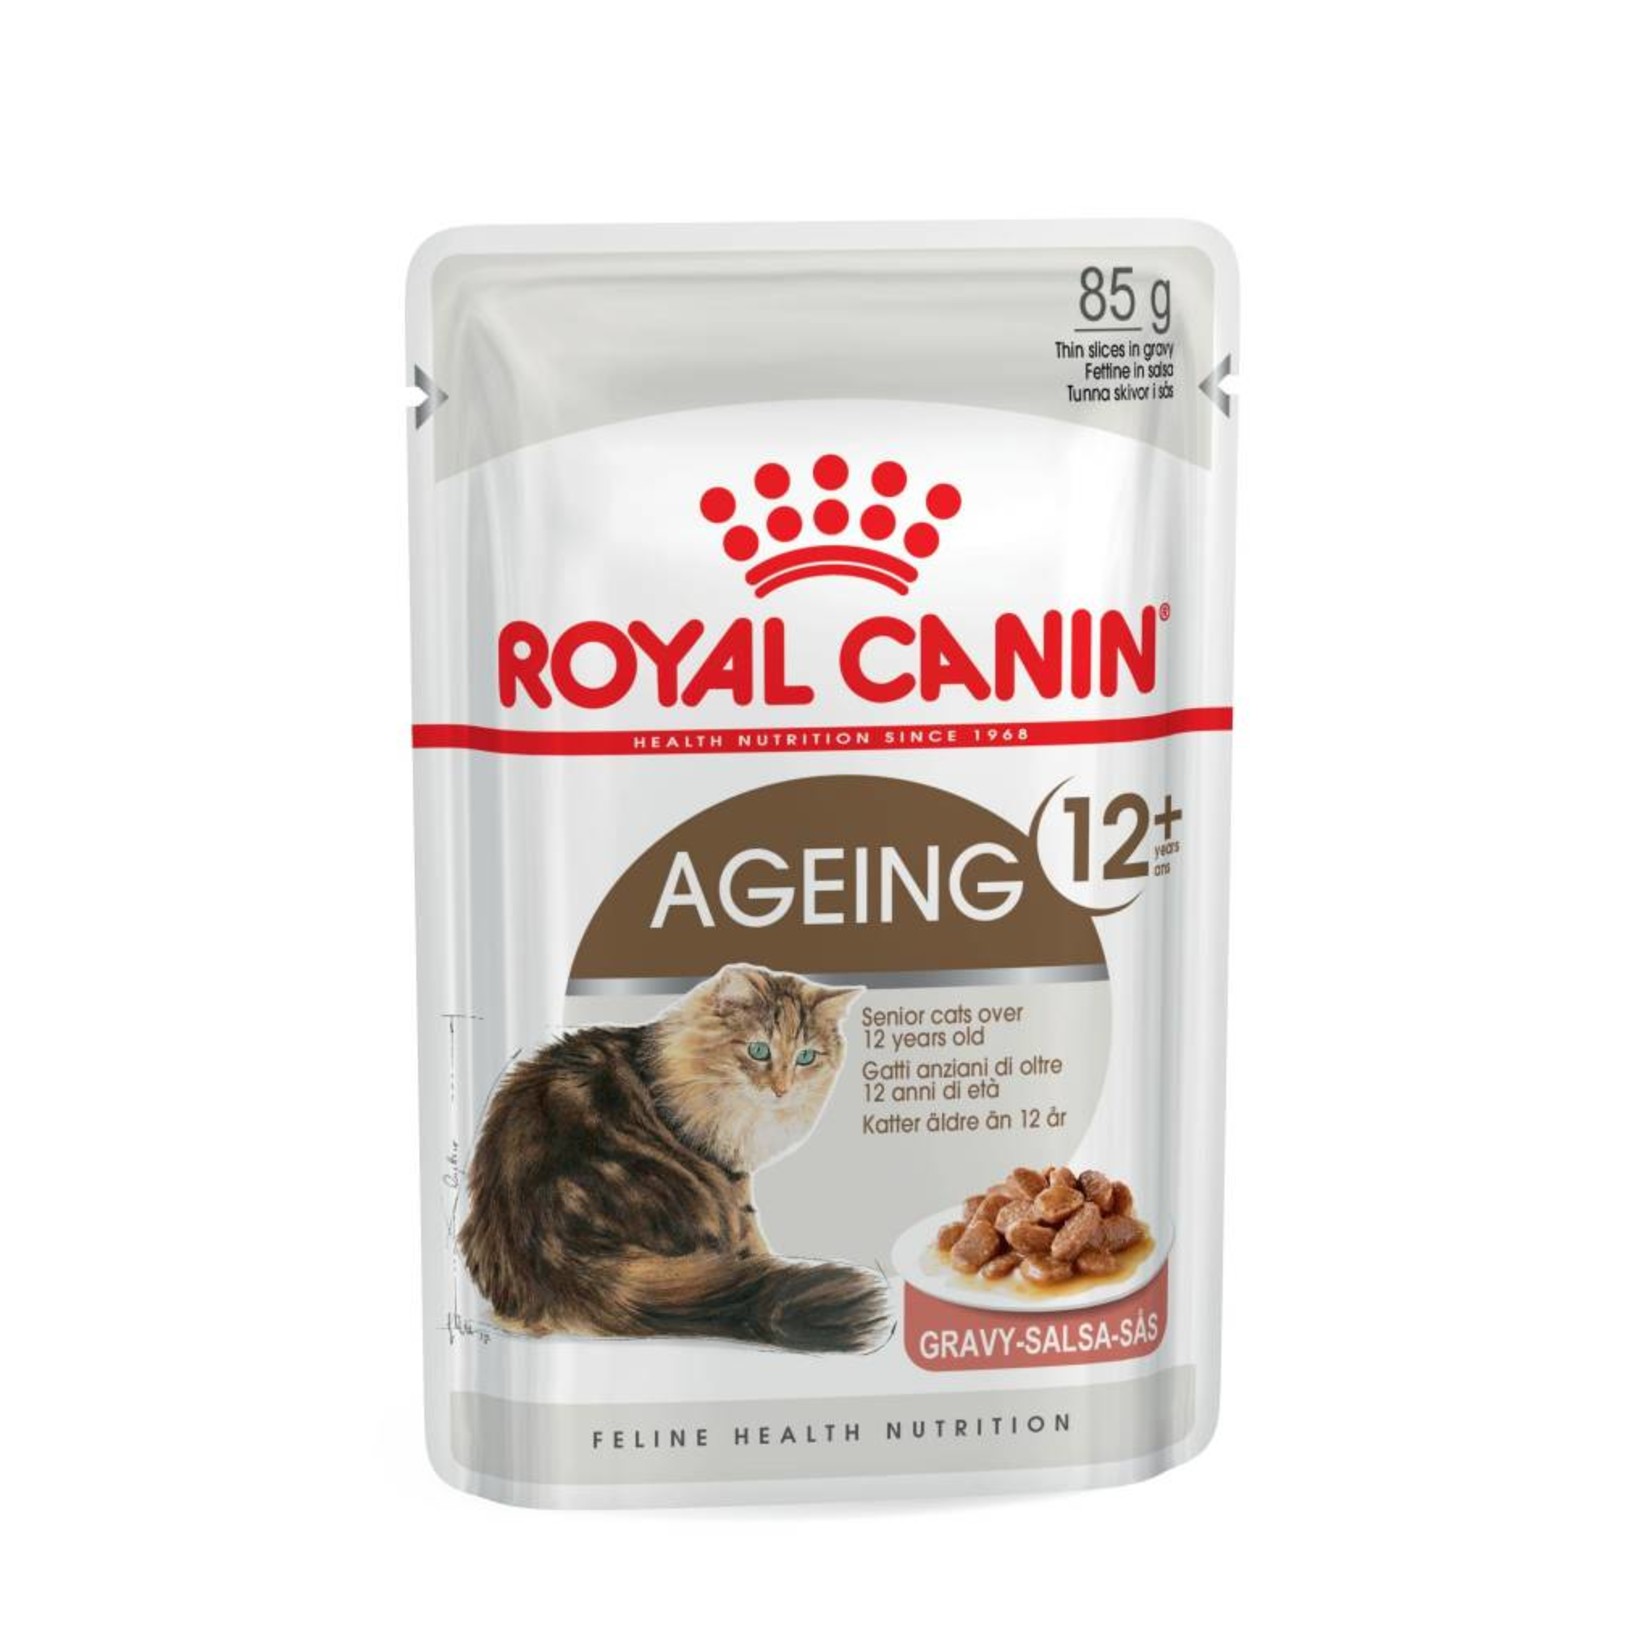 Royal Canin Ageing 12+ Senior Cat Wet Food Pouch with Gravy, 85g